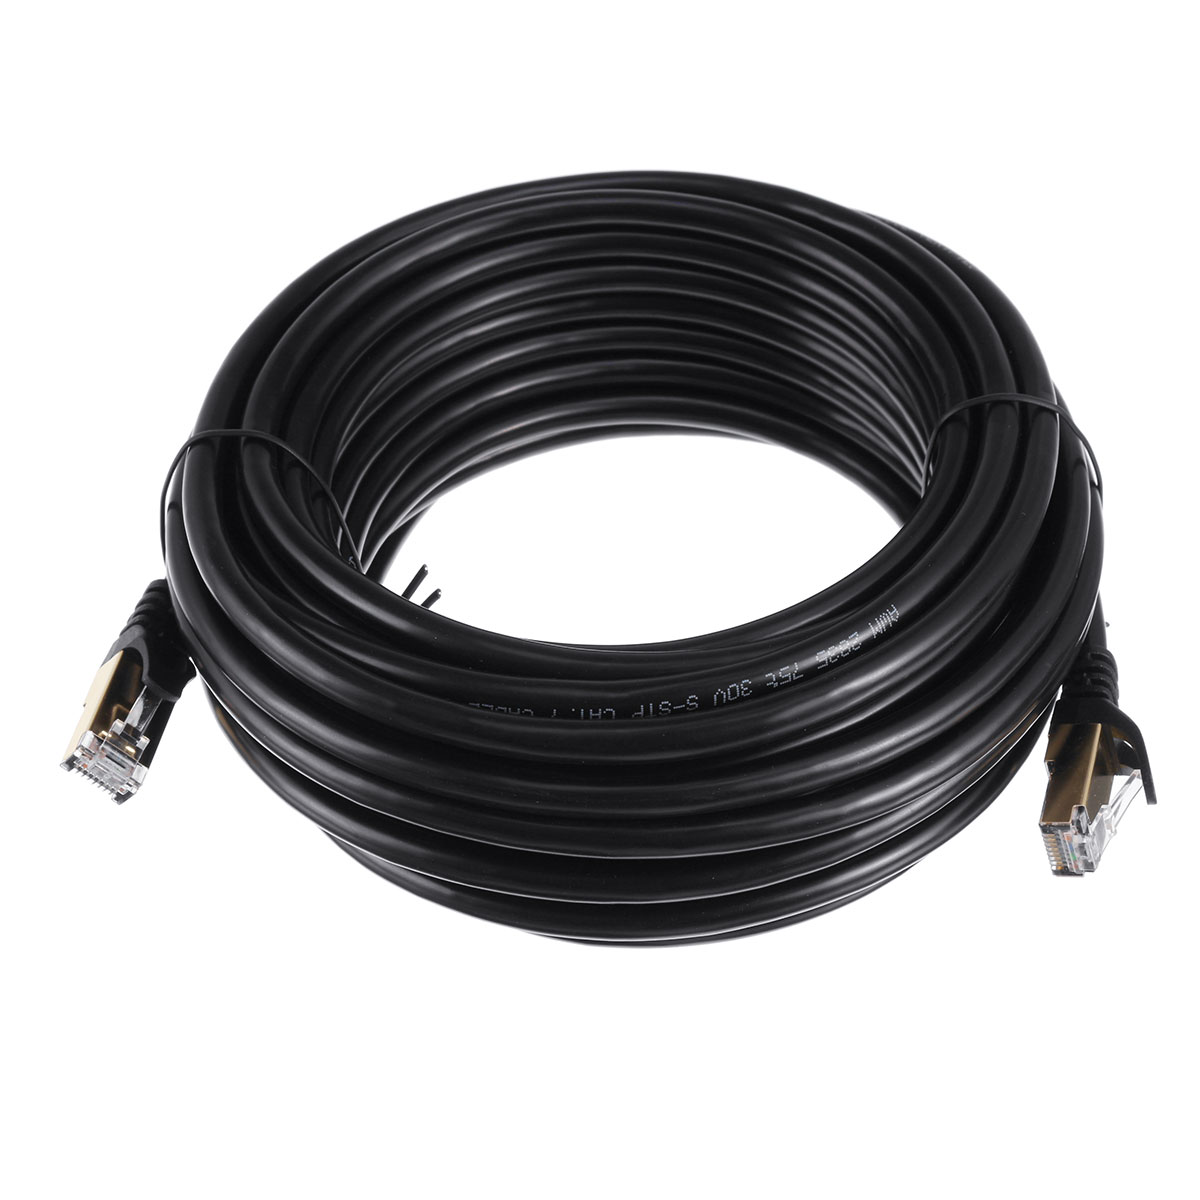 Black-Cat7-28AWG-High-Speed-Pure-Copper-Core-Networking-Cable-Cat7-Cable-LAN-Network-RJ45-Patch-Cord-1621196-4